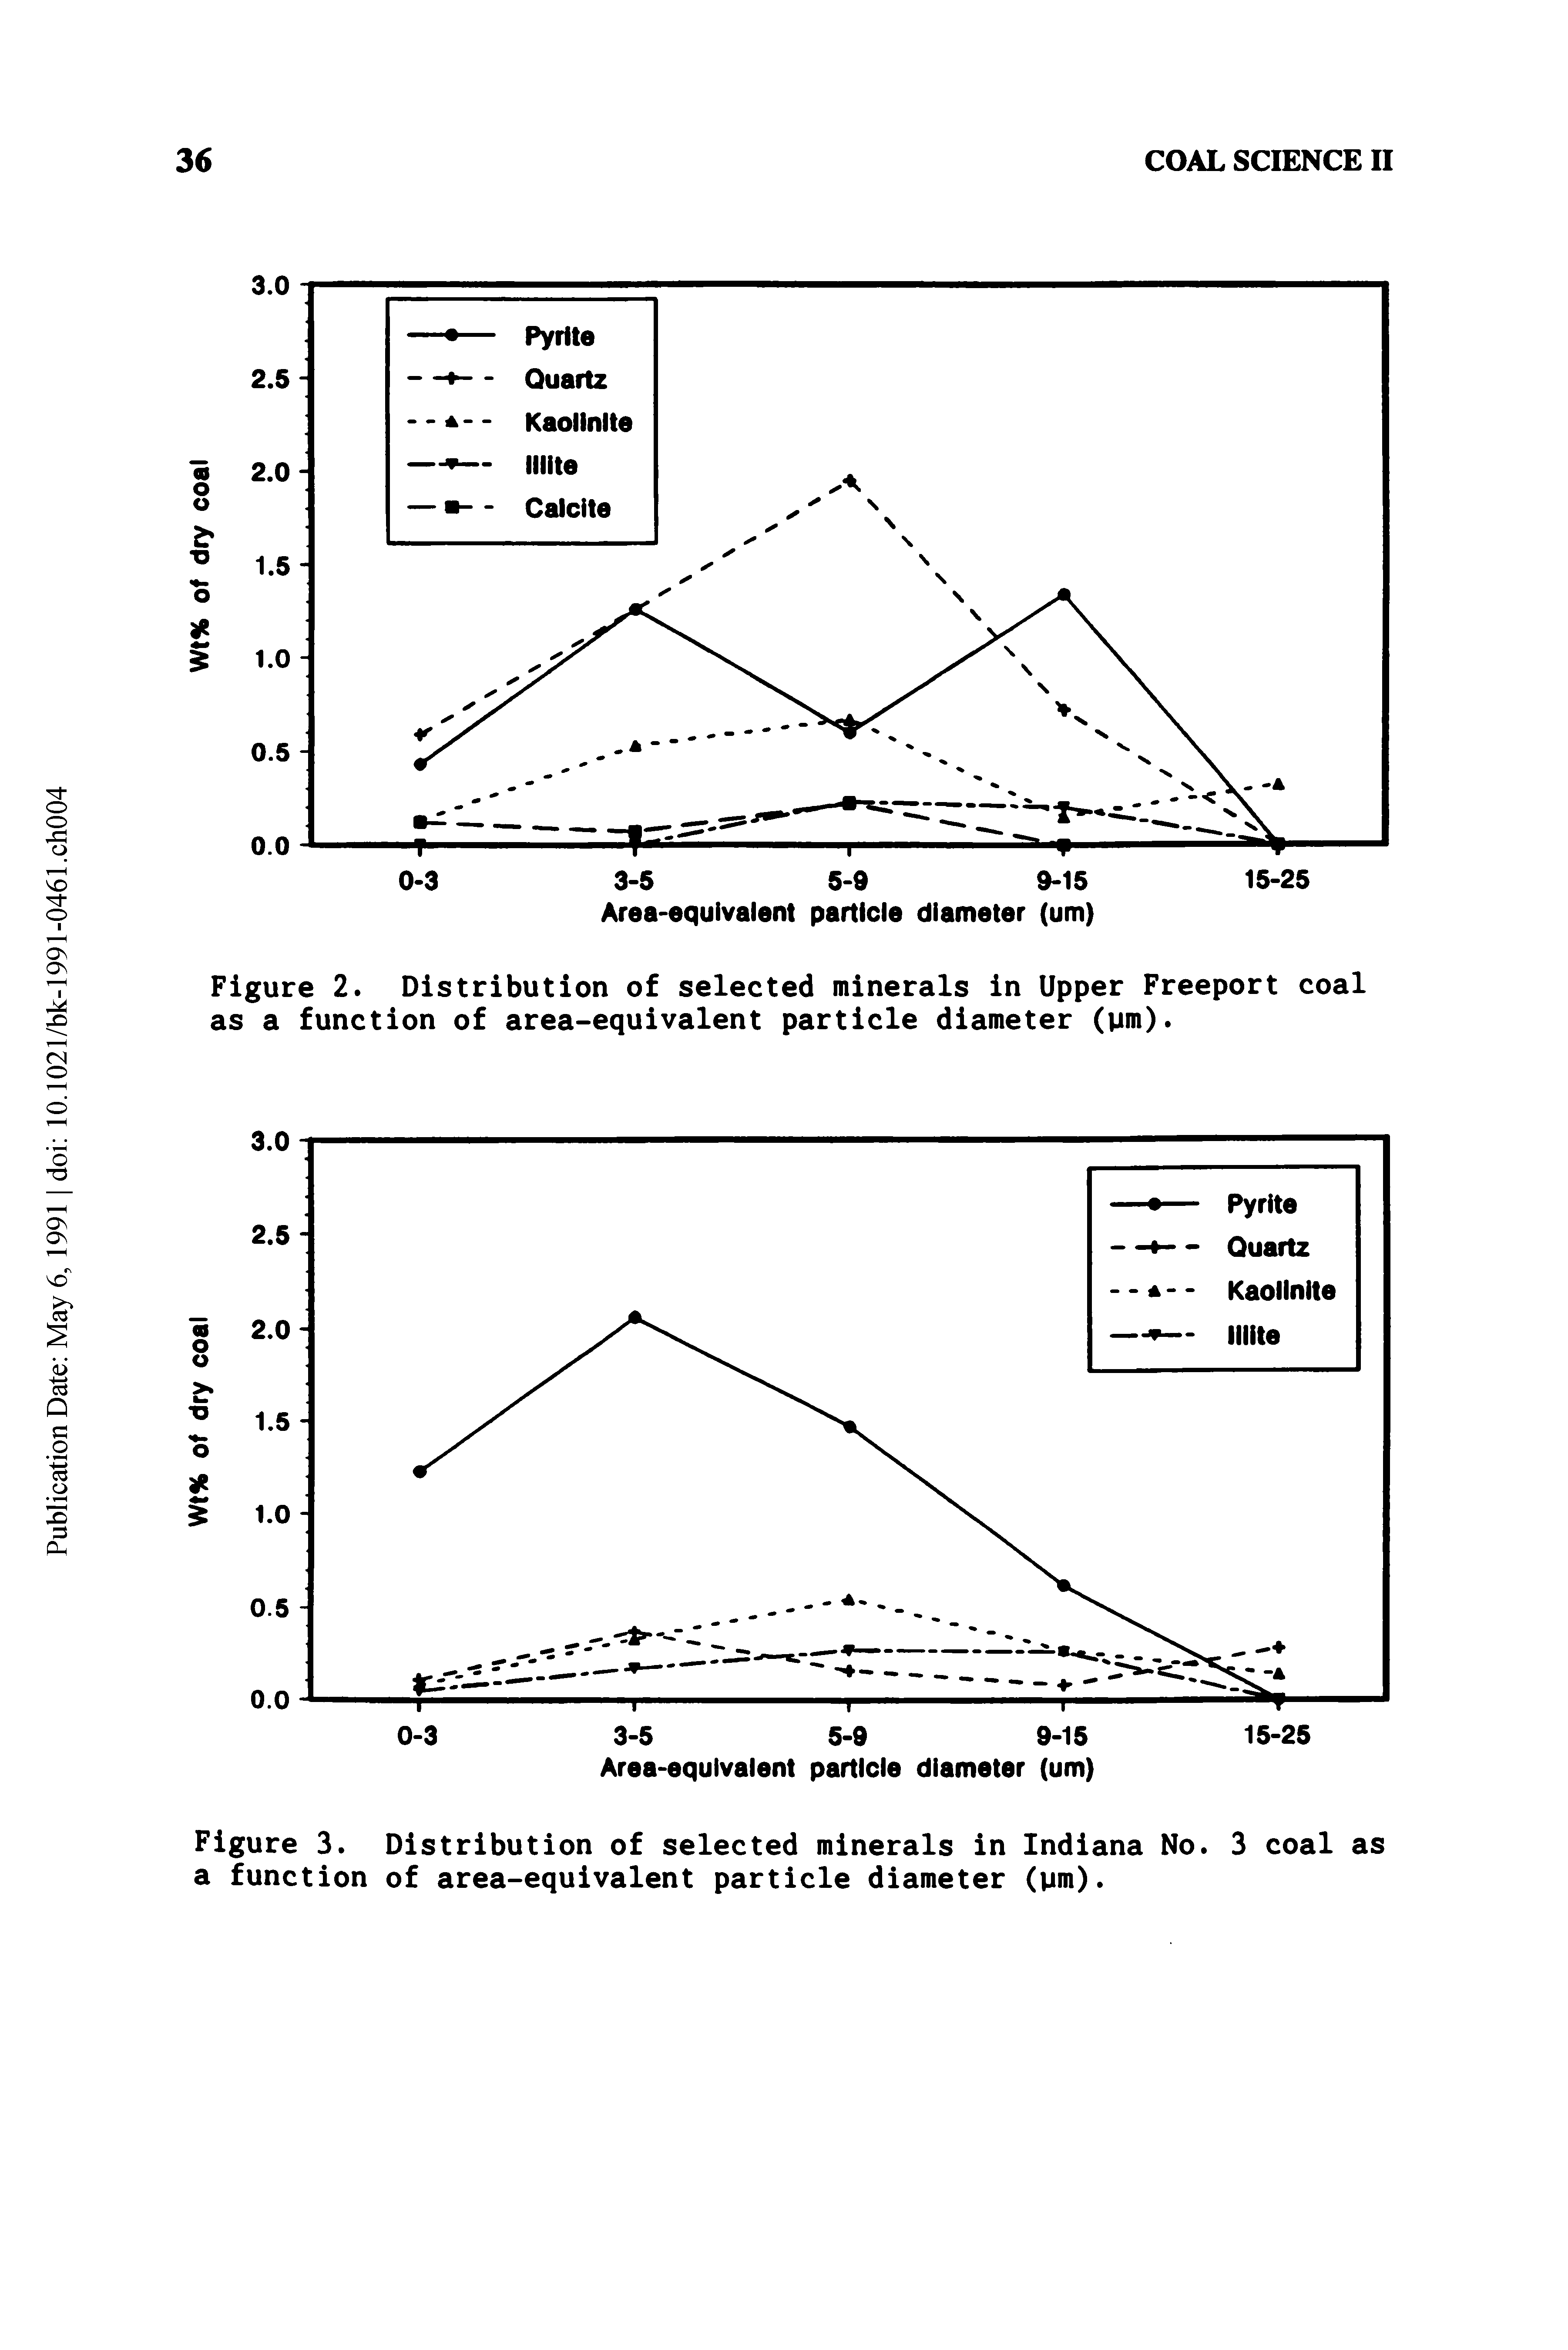 Figure 2. Distribution of selected minerals in Upper Freeport coal as a function of area-equivalent particle diameter (ym).